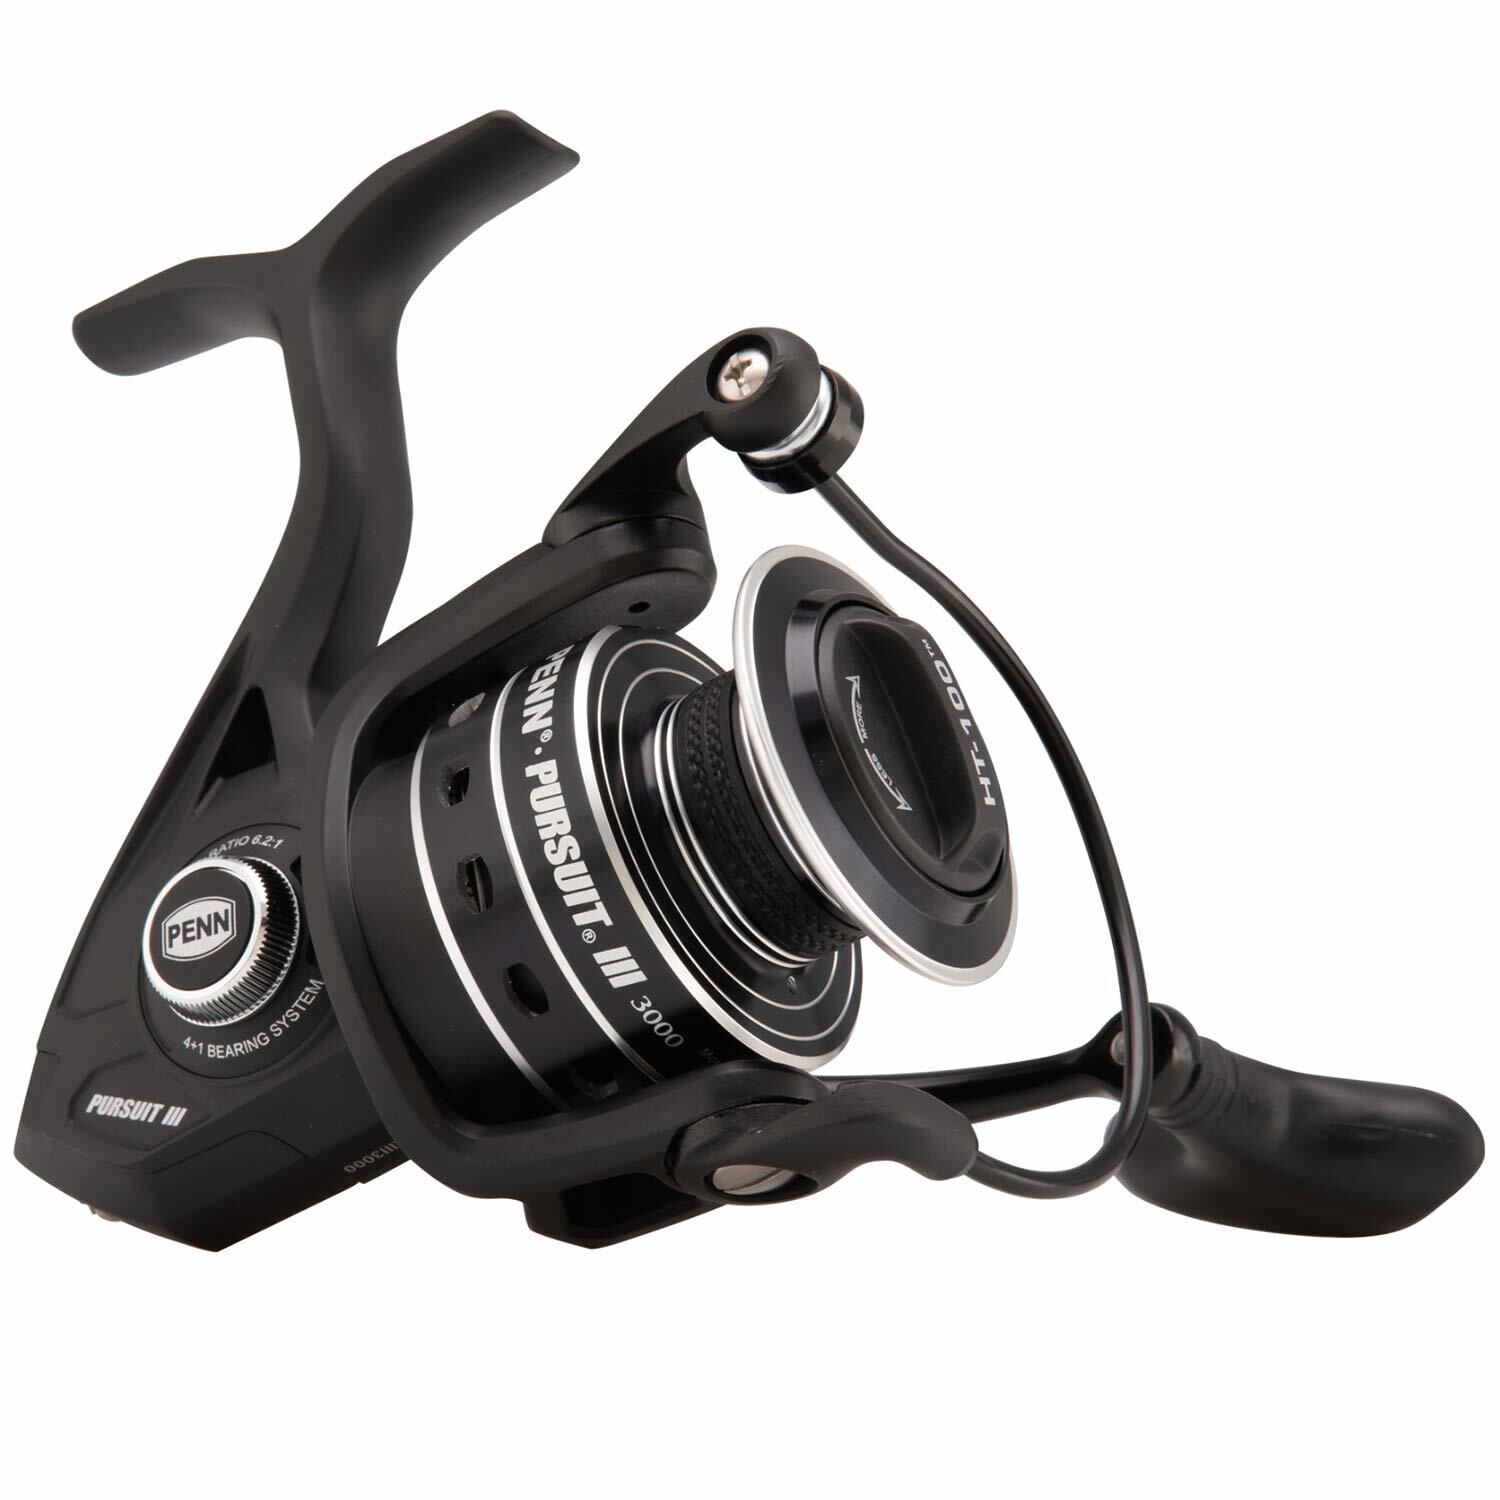 Details about   Penn Pursuit III 4000 Spinning Fishing Reel Black/Silver saltwater FREE SHIPPING 